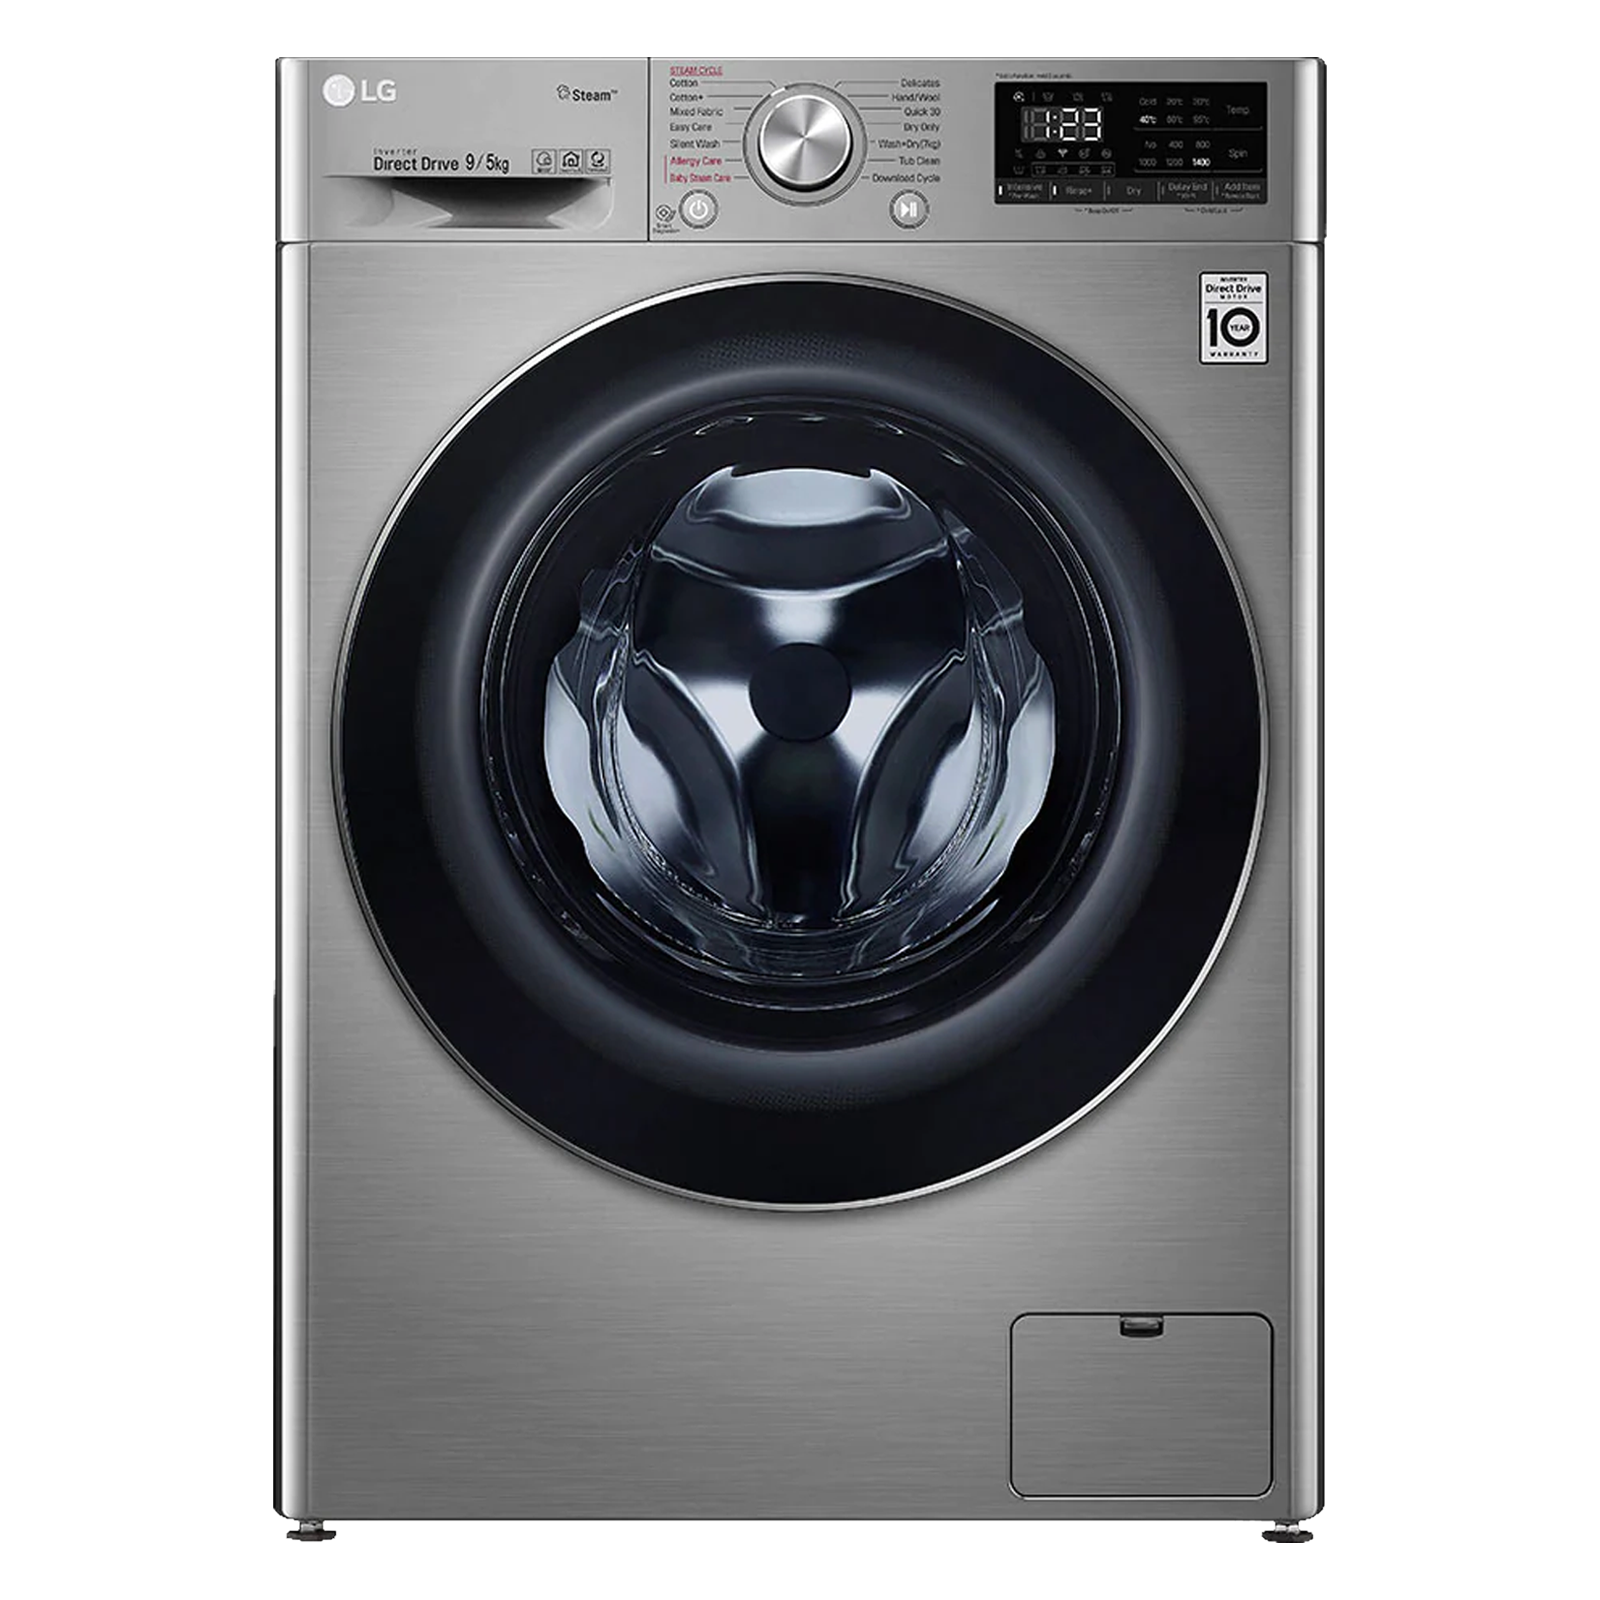 LG 9/5 kg 5 Star Inverter Fully Automatic Front Load Washer Dryer (FHD0905SWS.ASSQEIL, Steam Wash Technology, Silver)_1